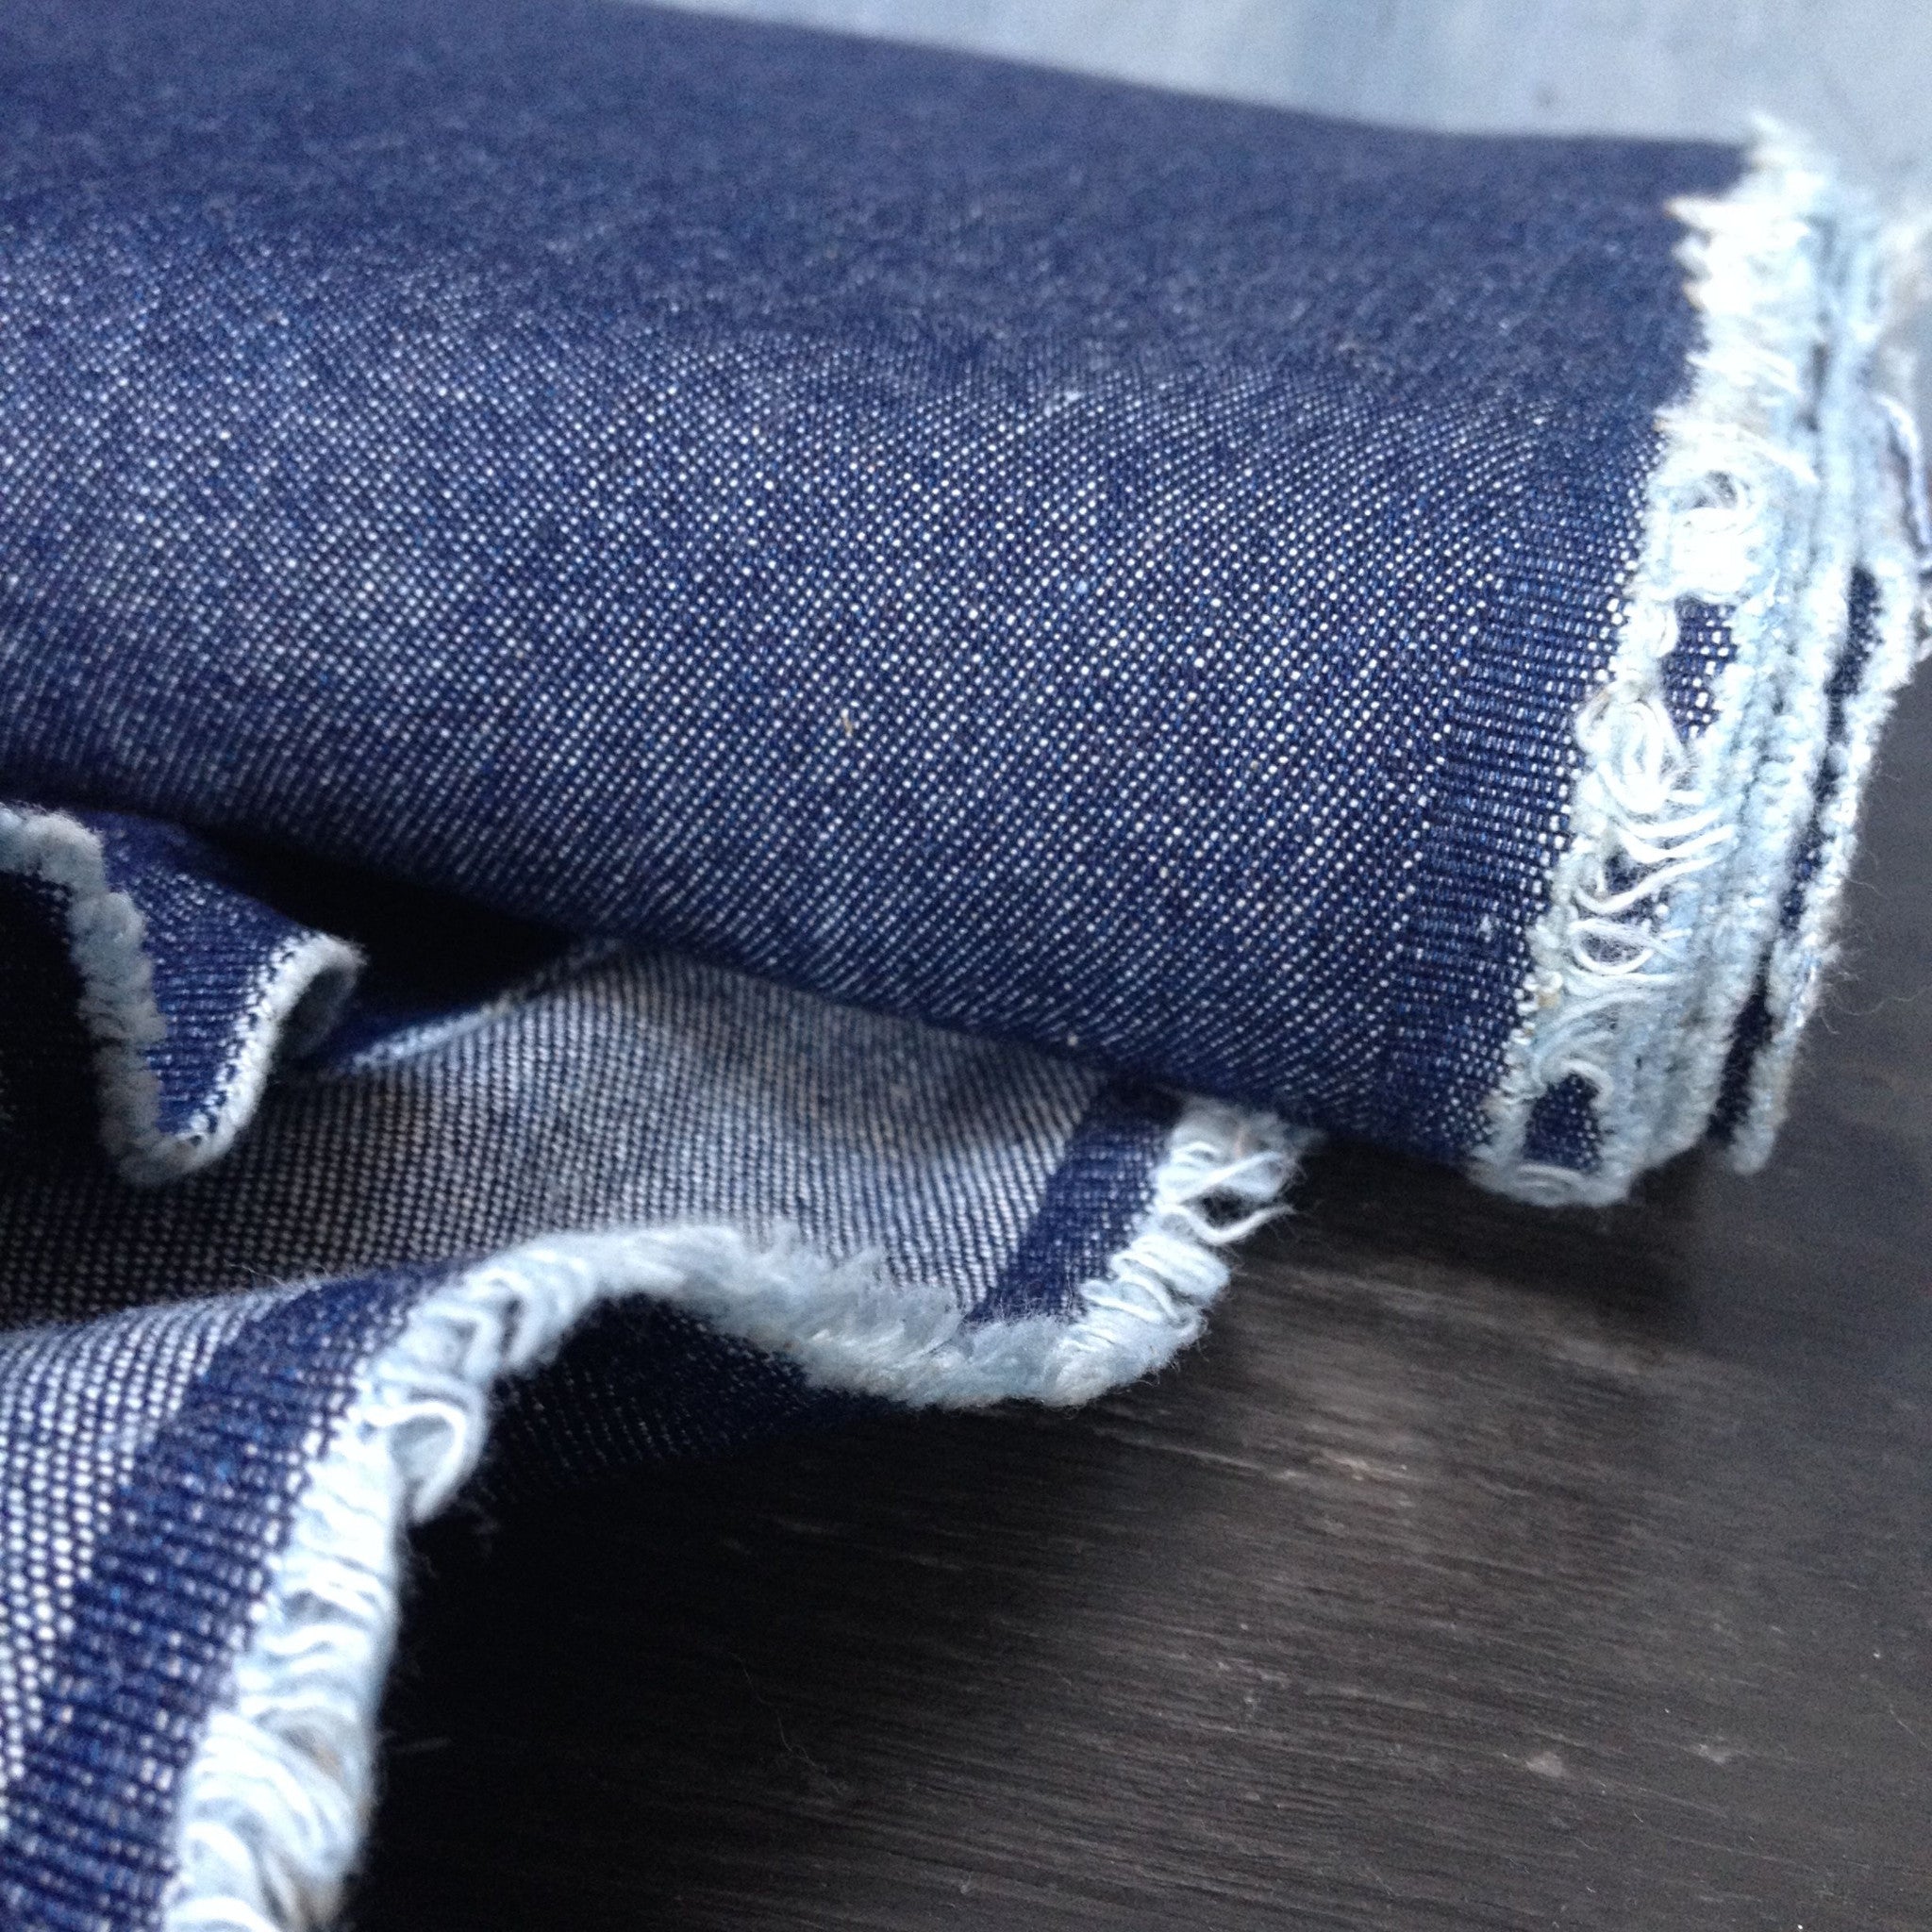 Tips for Washing and Protecting Denim Fabrics